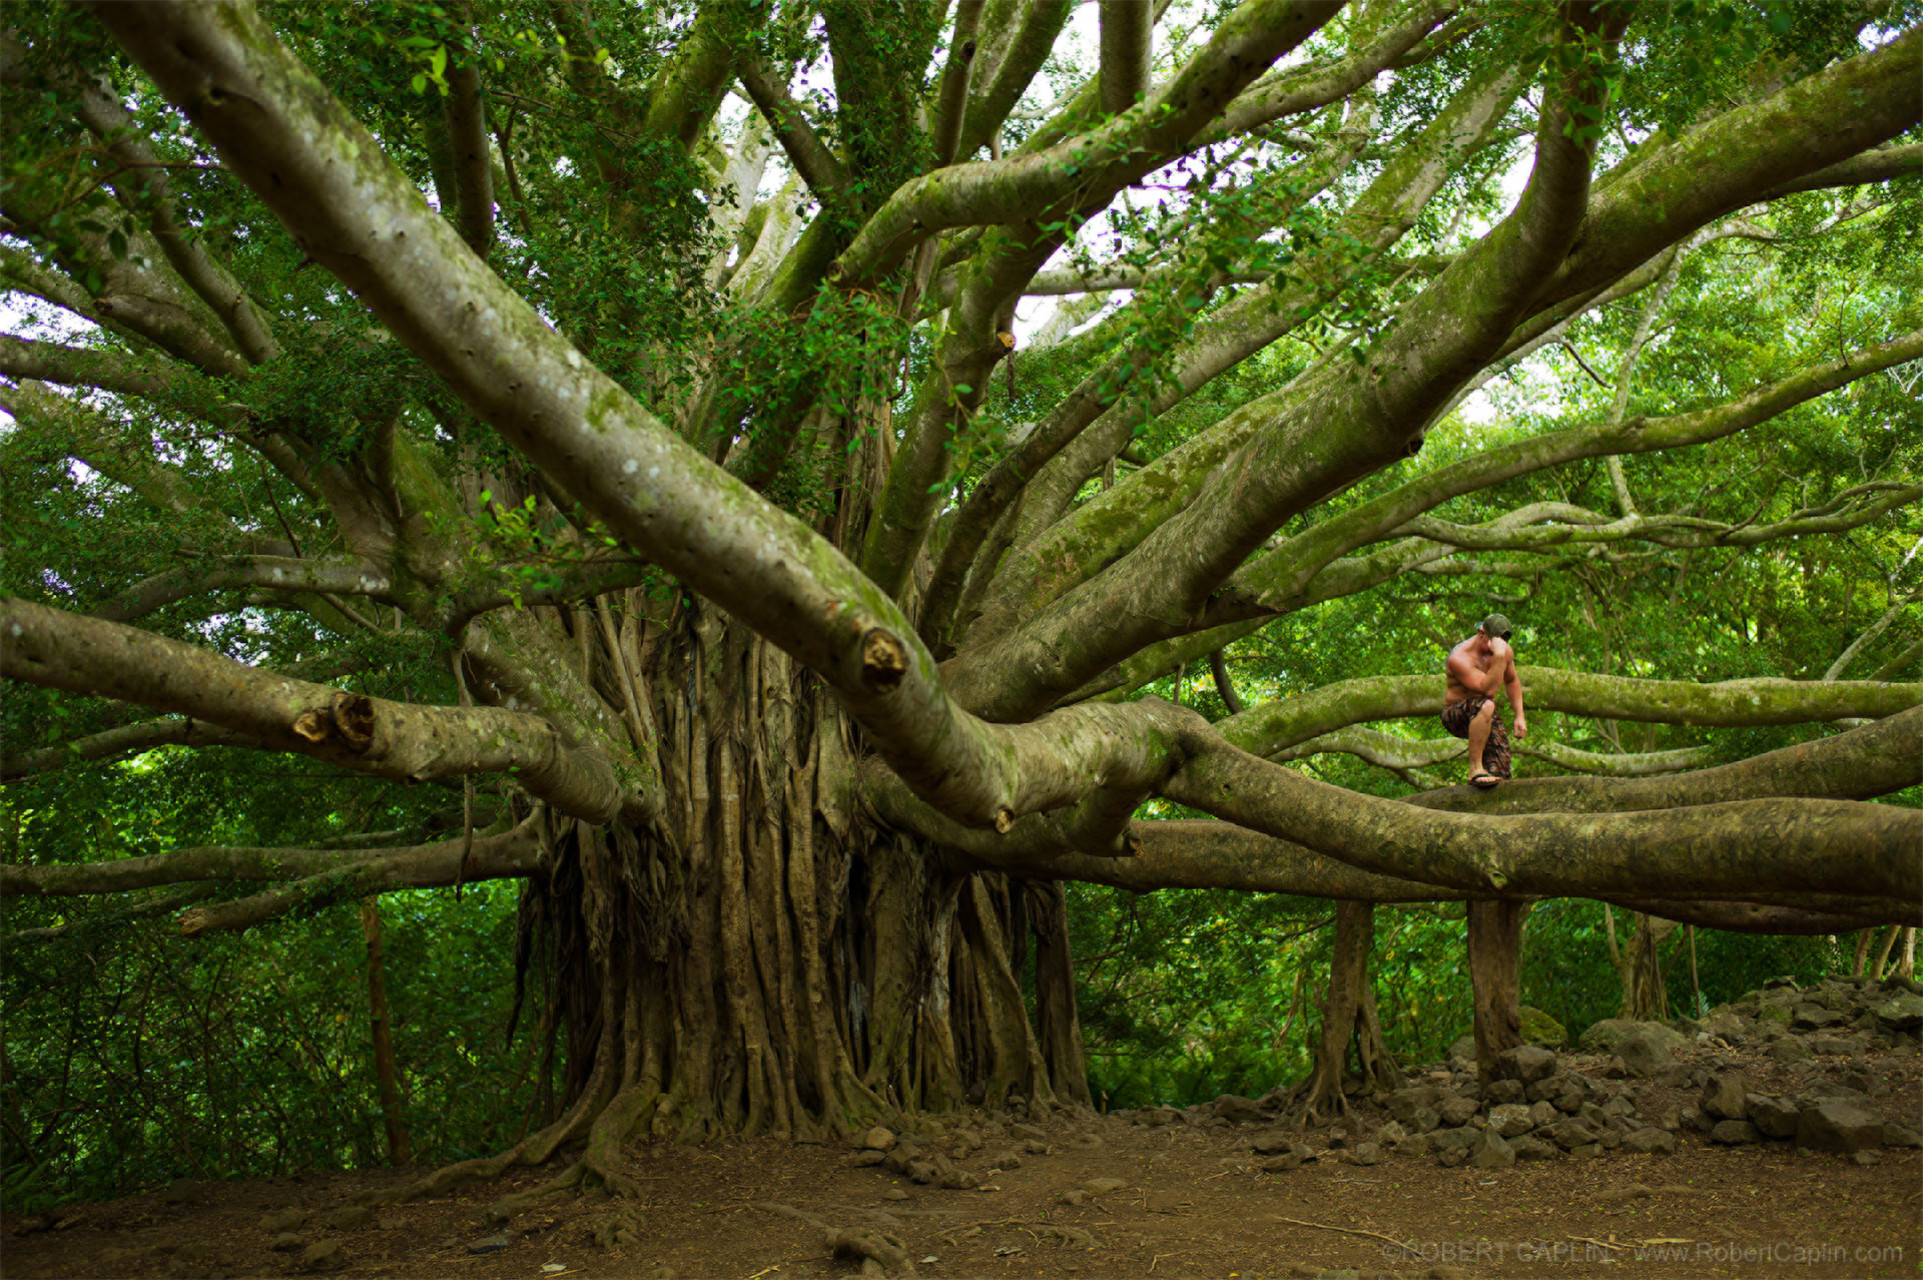 Capture the Beauty of Maui's Bamboo Forest